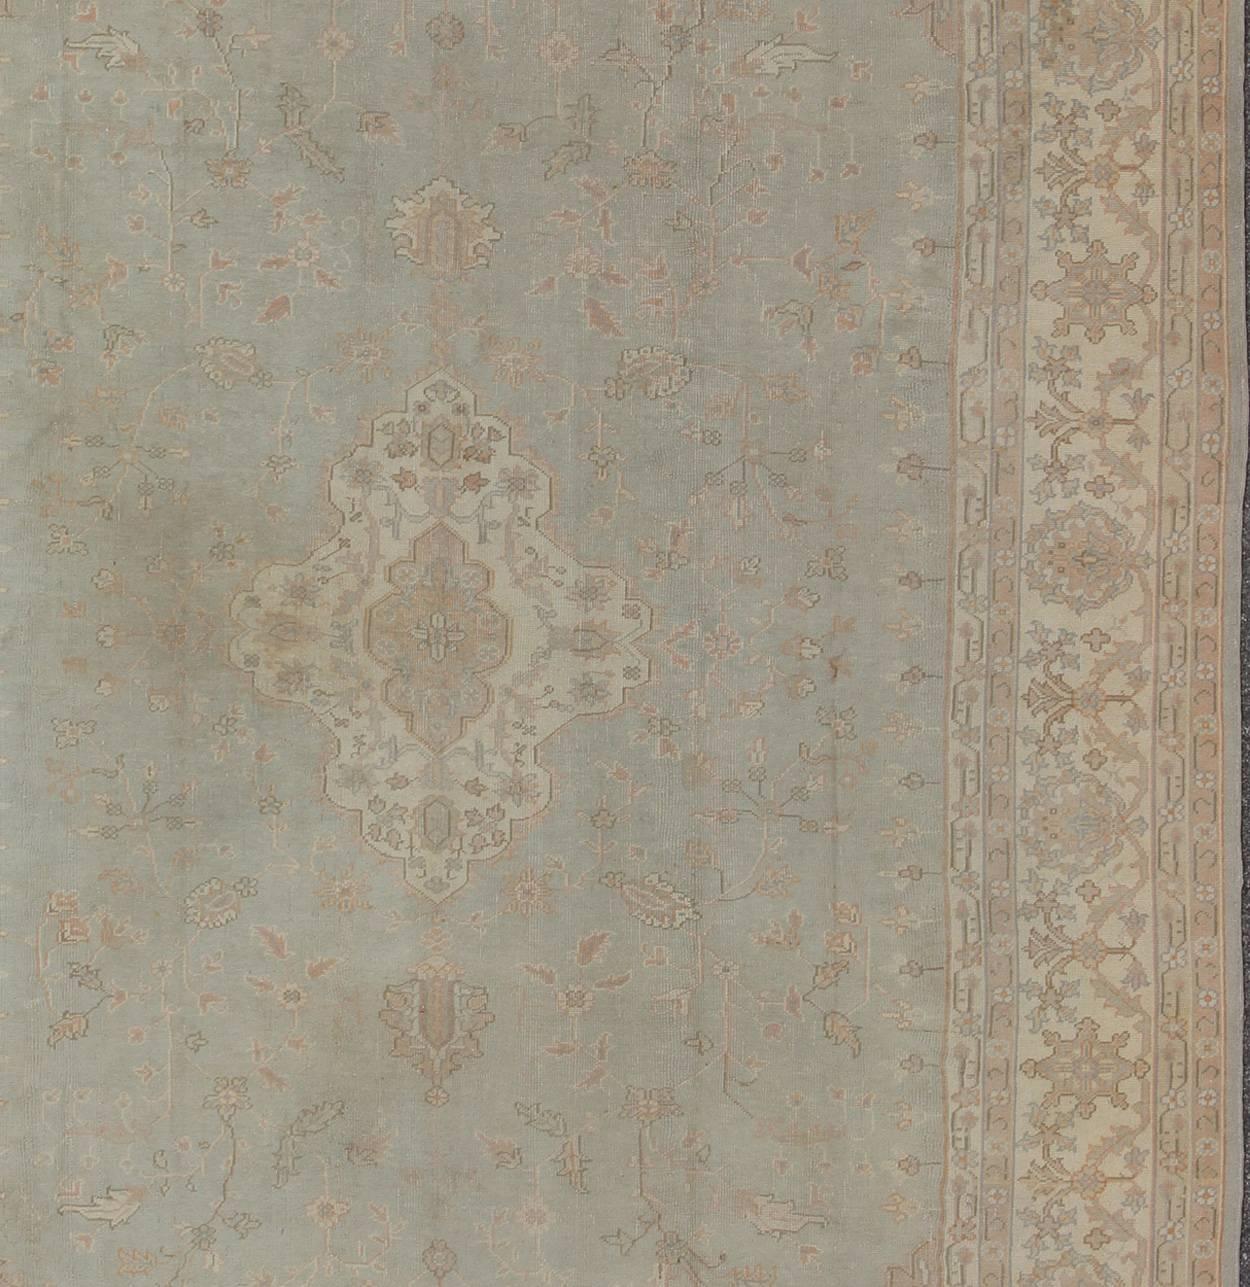 Hand-Knotted Antique Oushak Carpet in Pale Gray Blue, Taupe, Pink, Ivory and Light Salmon For Sale